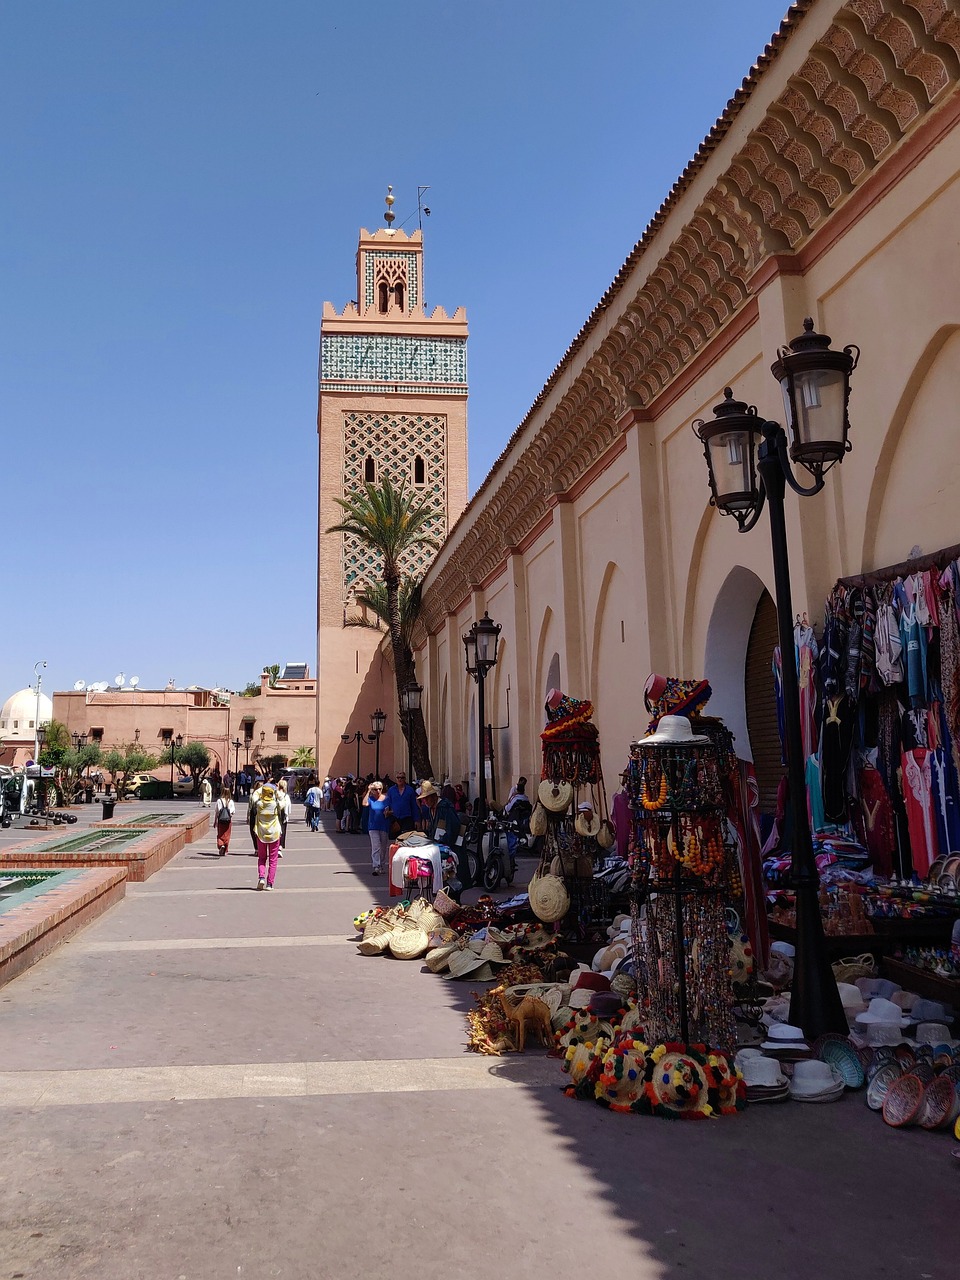 Panoramic view of the journey from Jemaa el-Fna to Ben Youssef, capturing the essence and vibrancy of Marrakech Souks' main thoroughfare